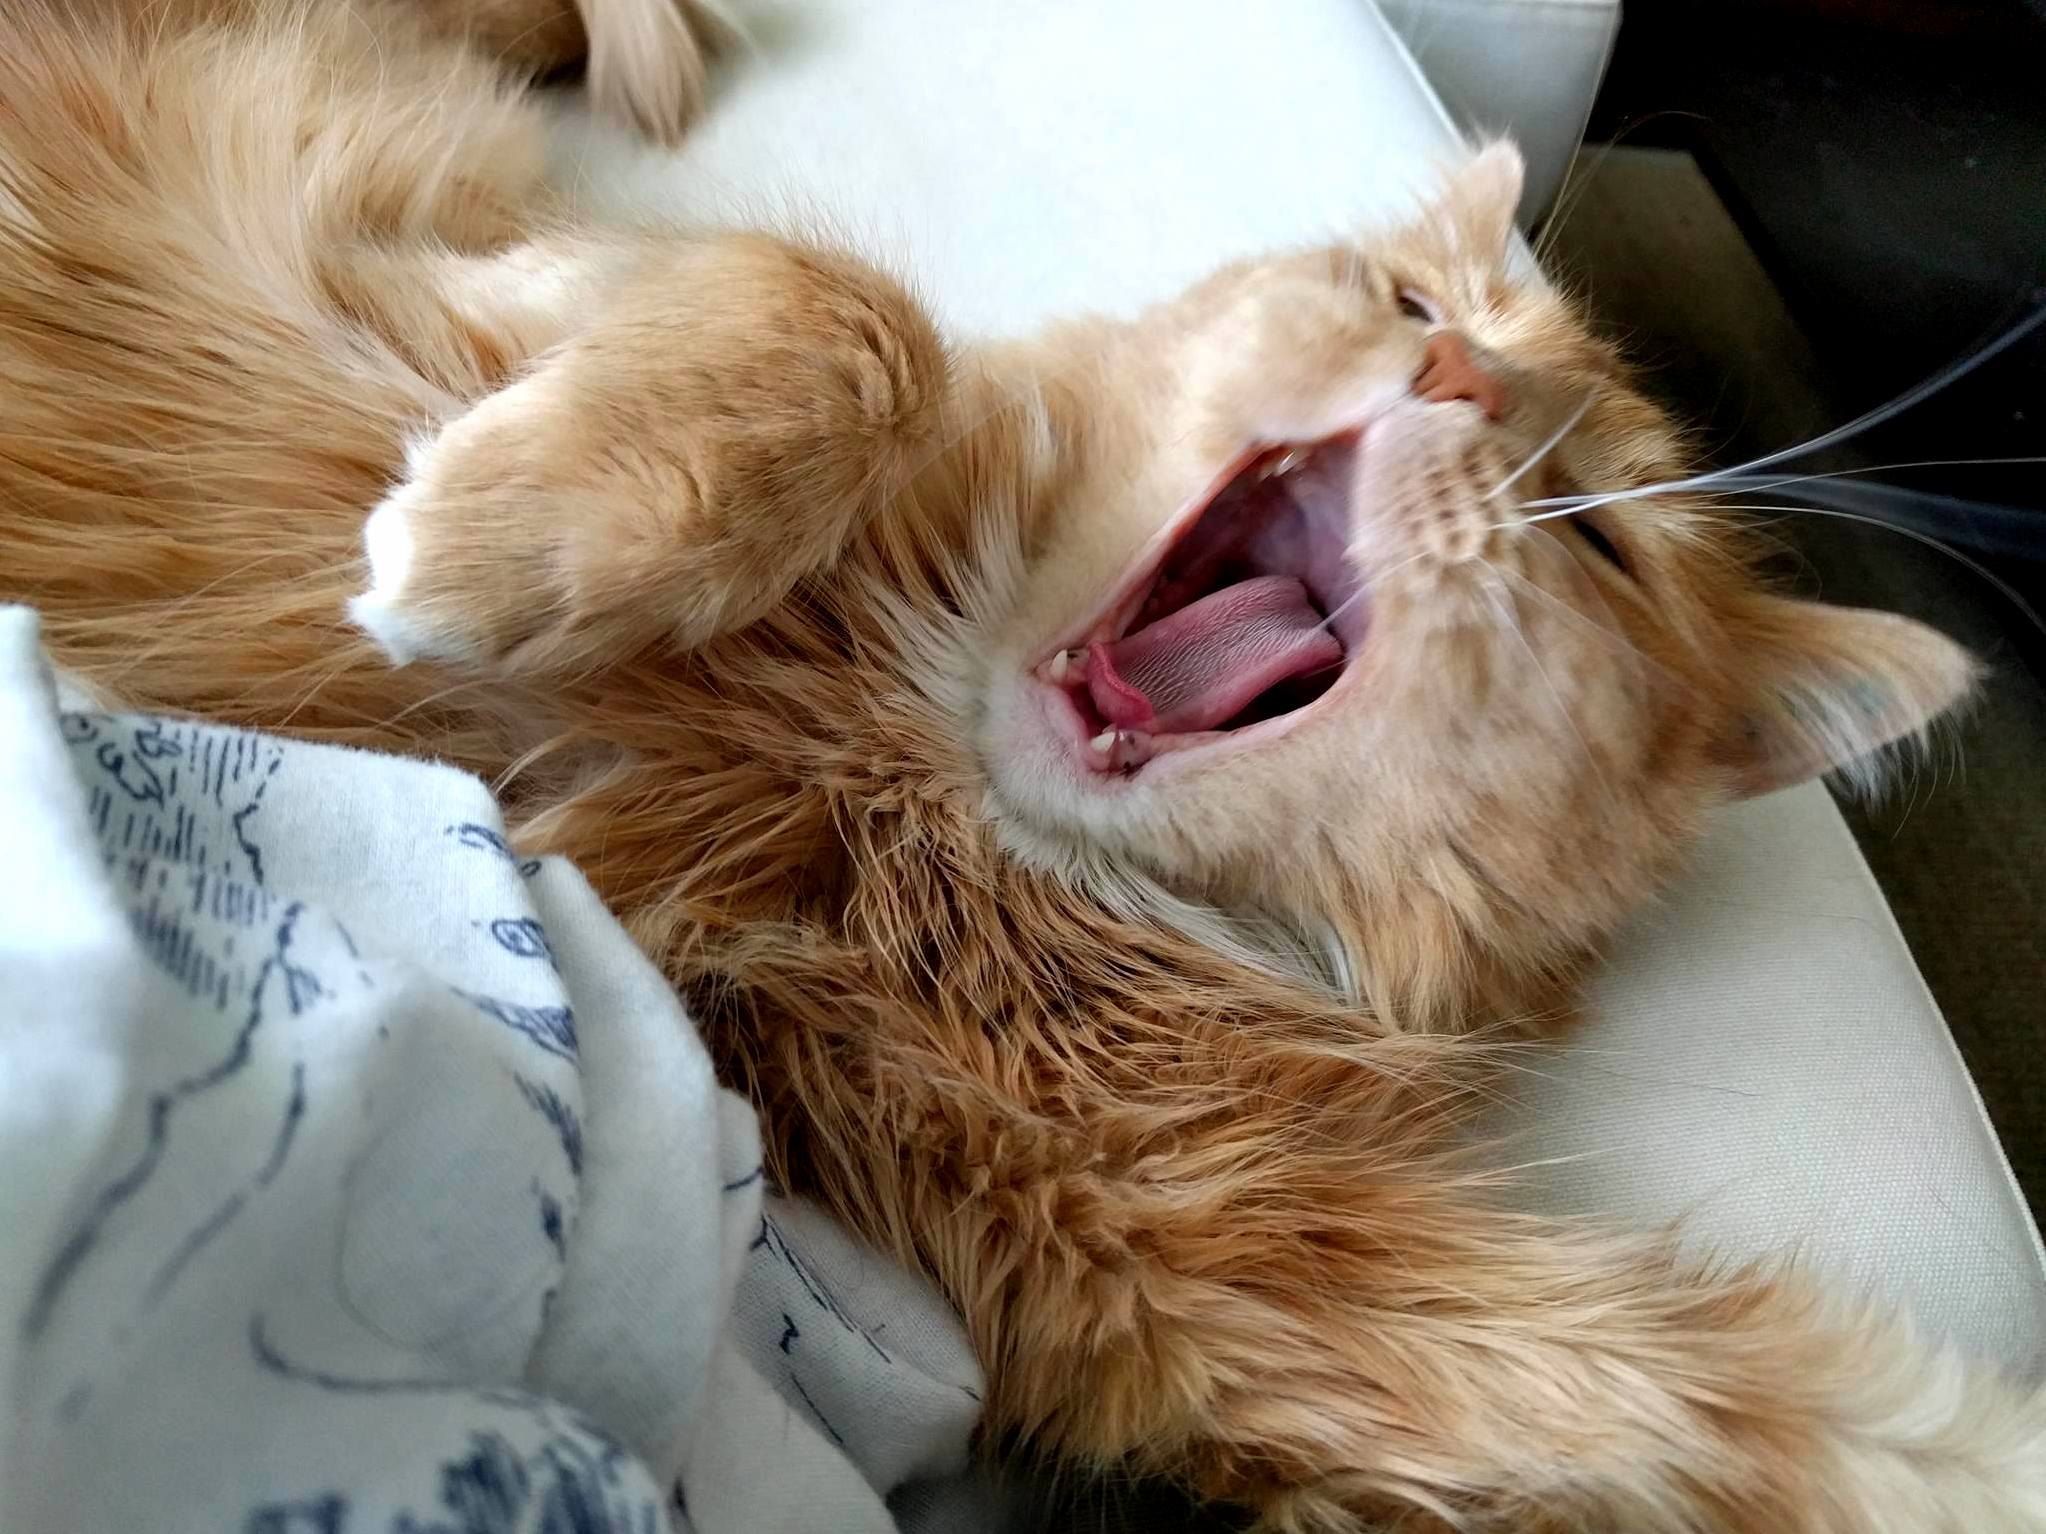 My cat yawning might be one of the most adorable things ever